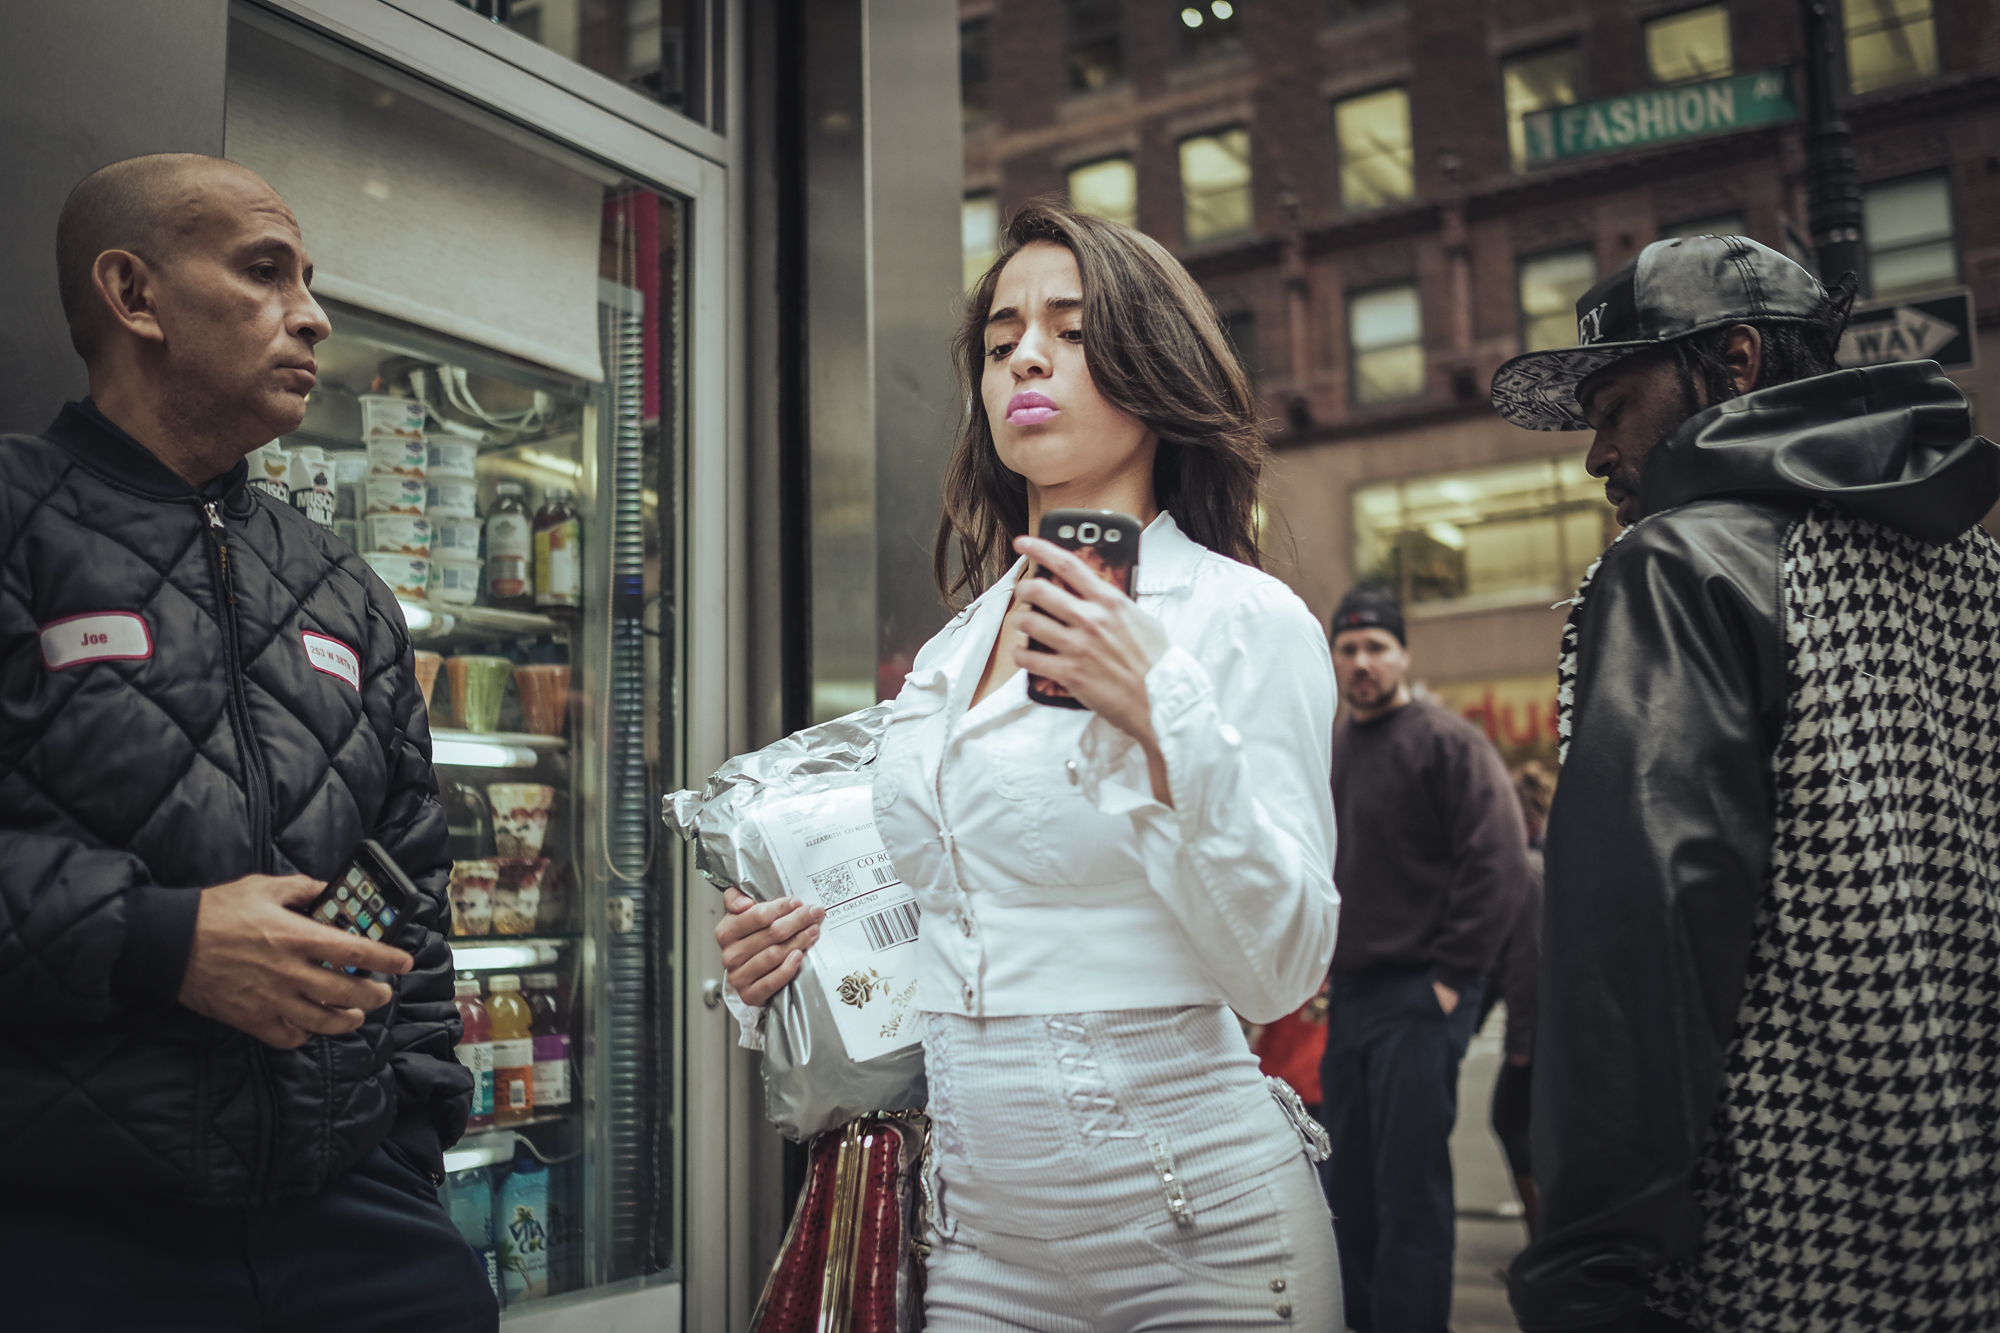 How Omar Z Robles Made $200,000 from Street Photography